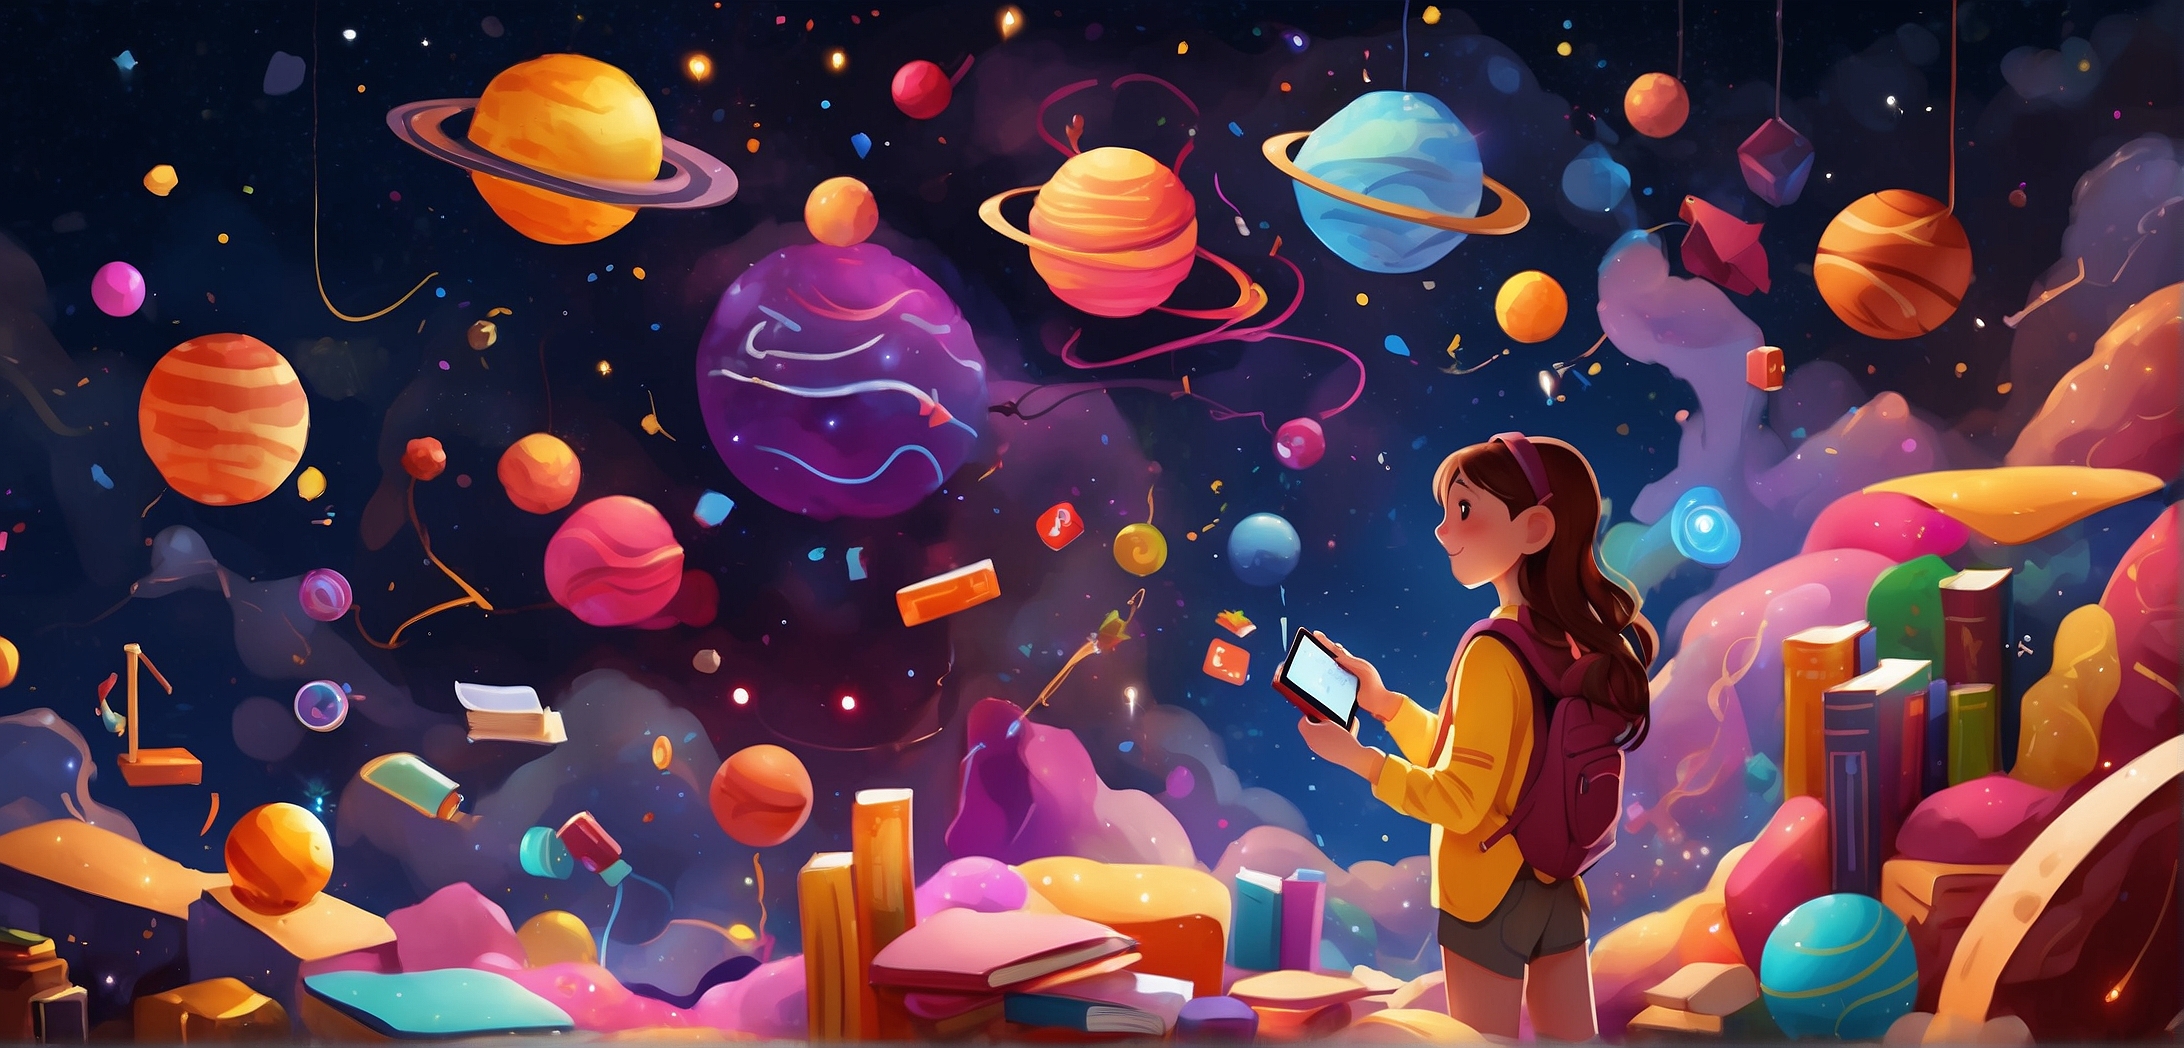 In a vibrant space filled with books, planets, and stars, a student interacts with a tablet-like device. 